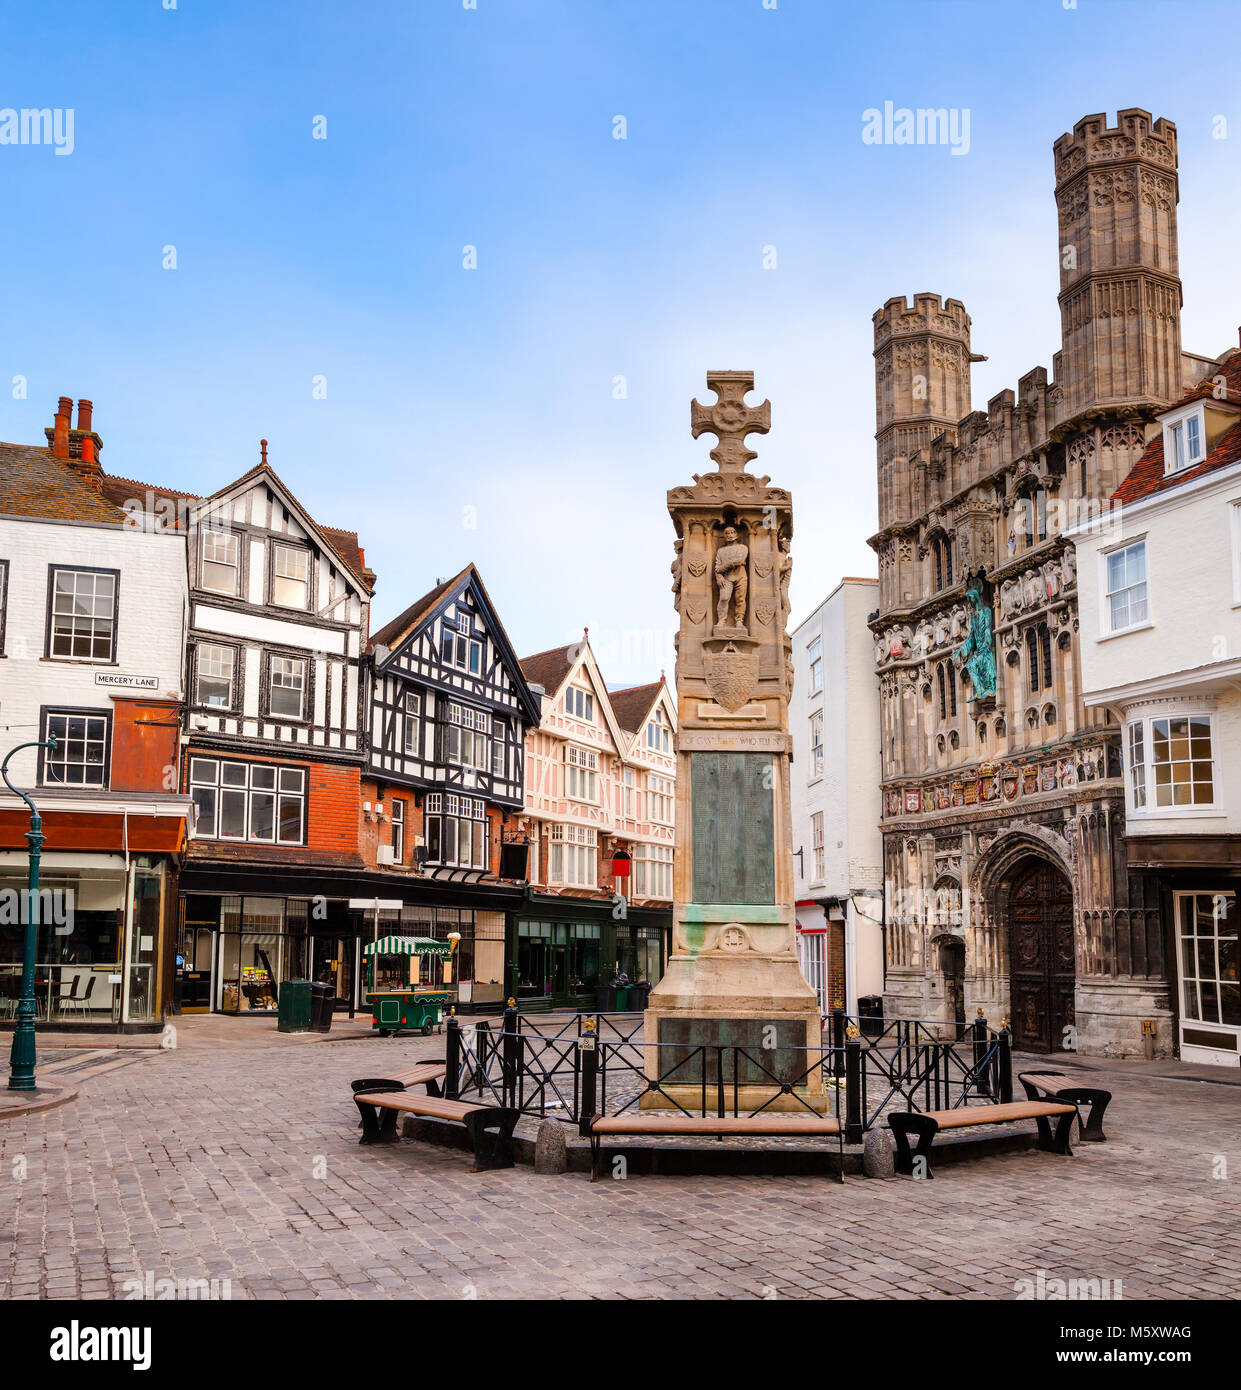 The War Memorial and Cathedral entrance at Buttermarket square in the morning. Canterbury is a historic English cathedral city and UNESCO World Herita Stock Photo